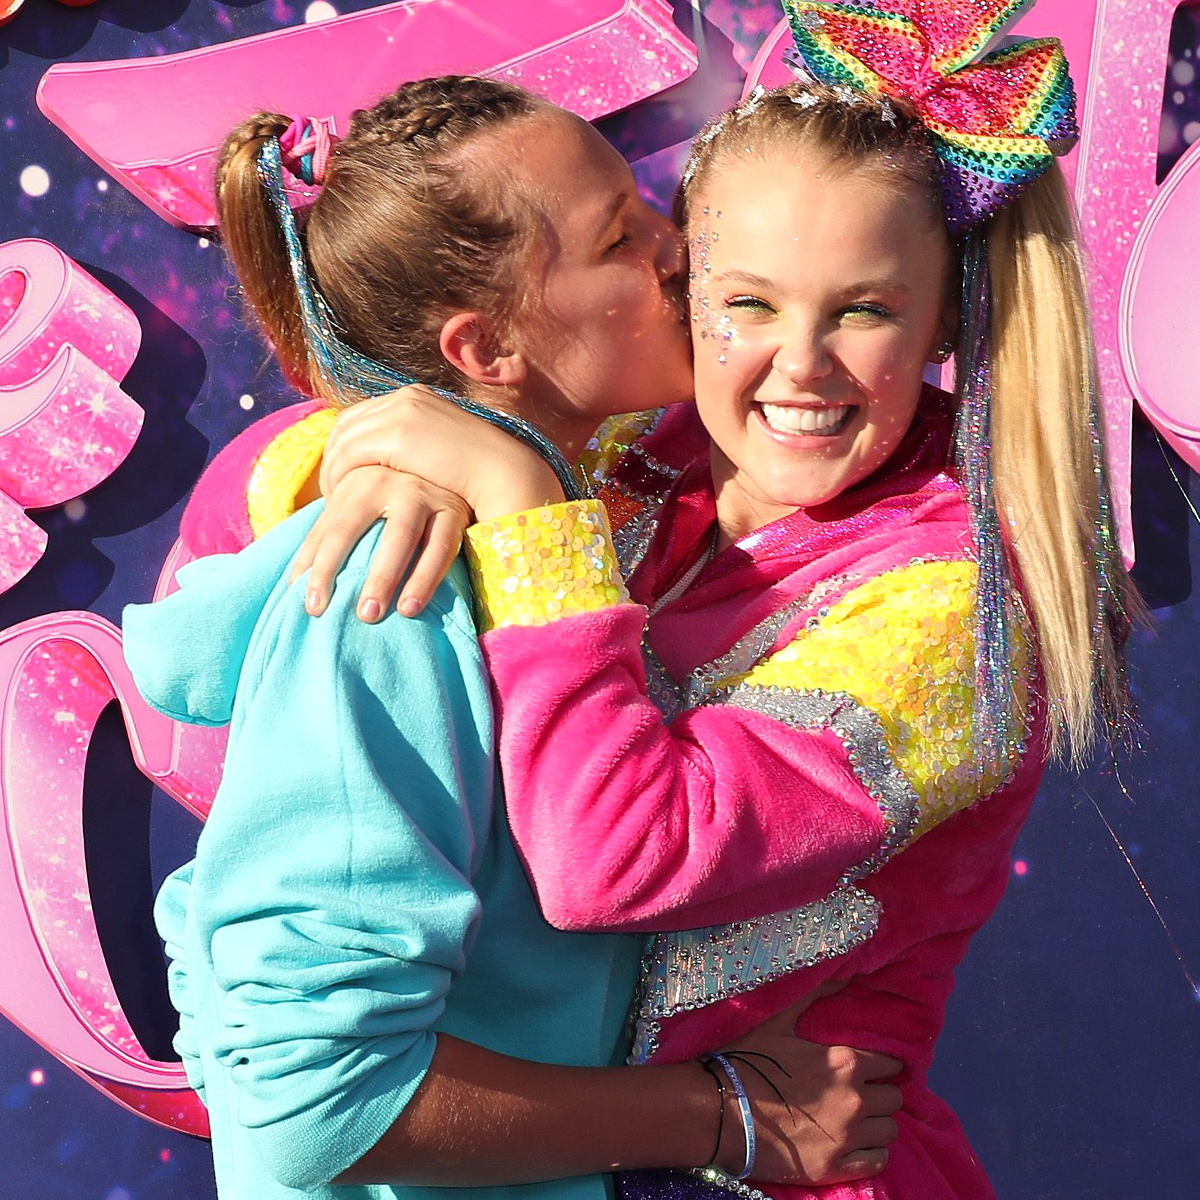 JoJo Siwa Spotted Holding Hands With Ex Kylie Prew During Disney Trip